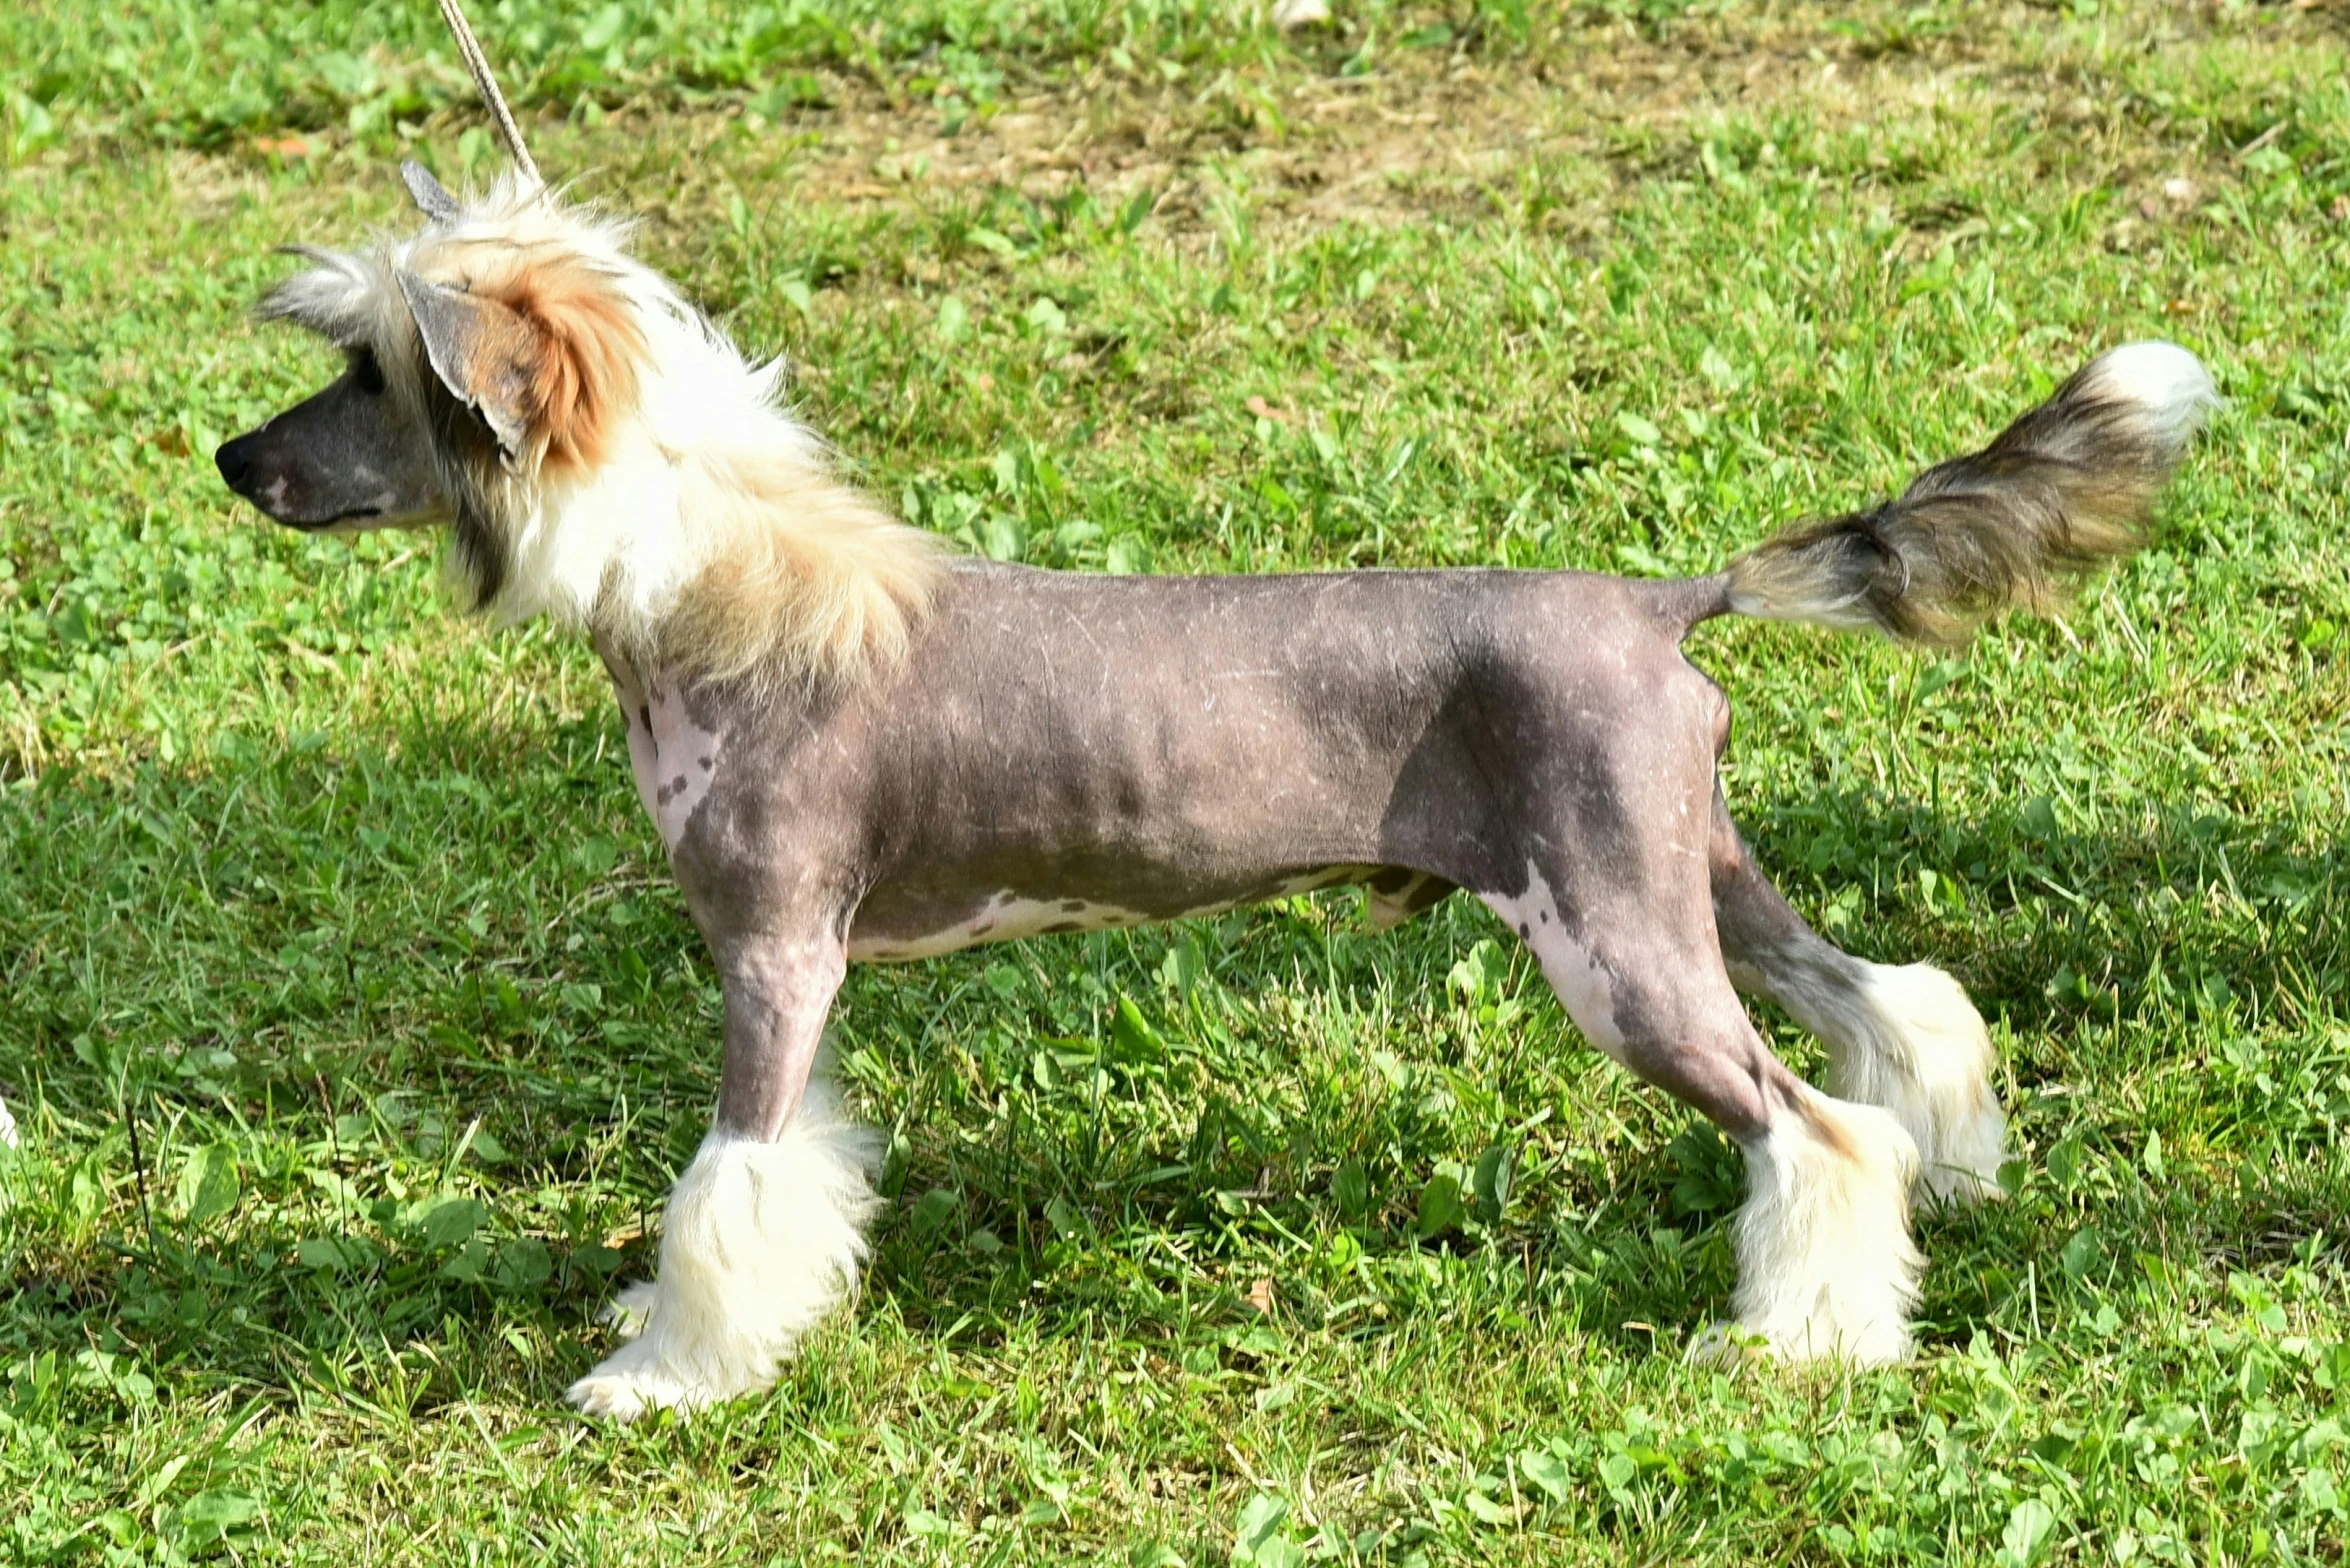 an older gray dog with white and tan patches in the grass